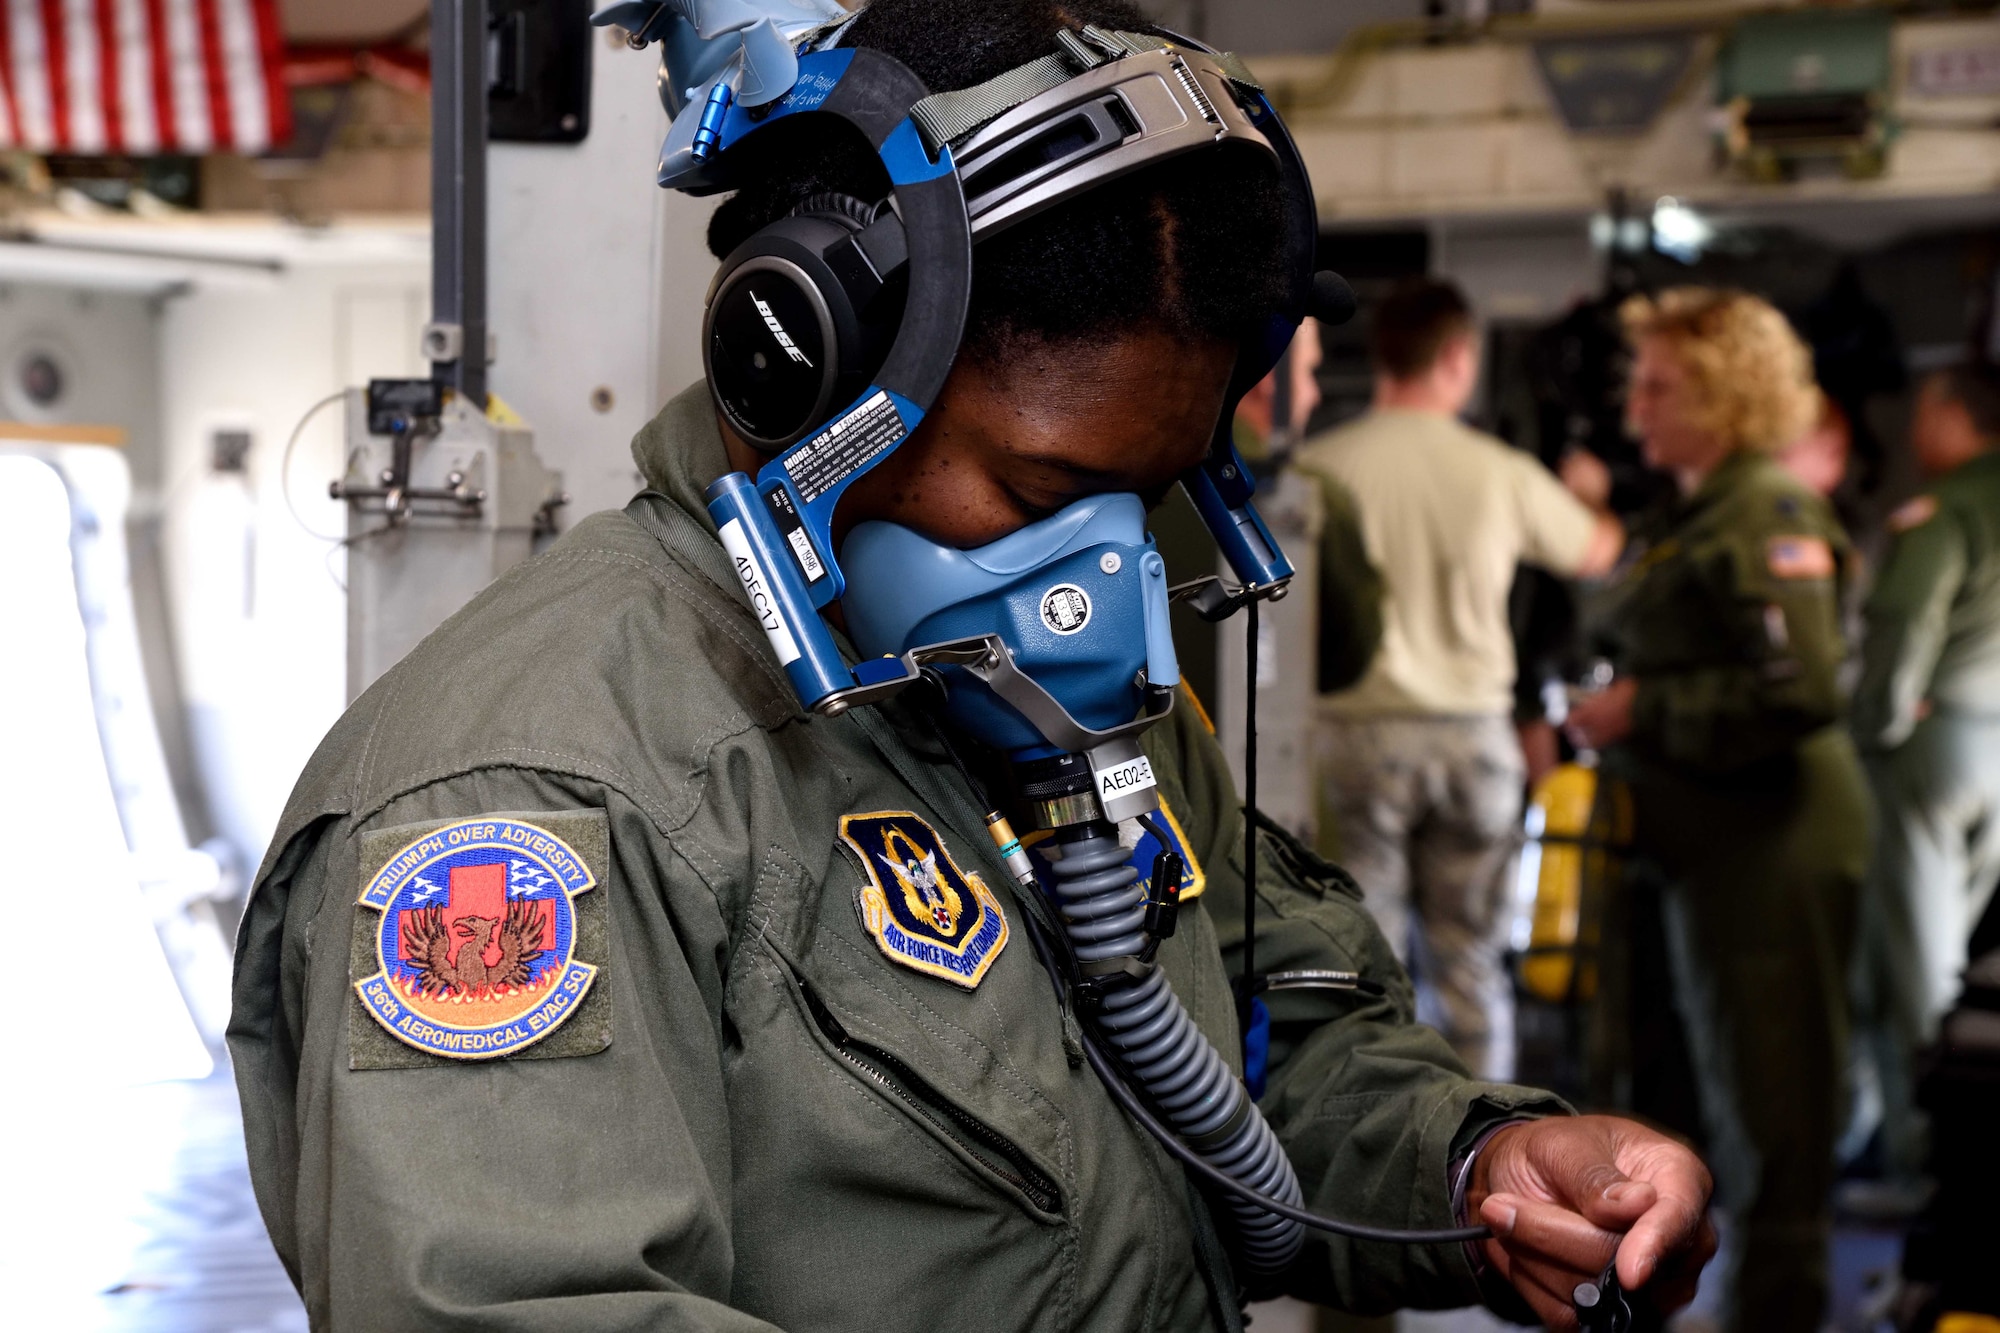 Master Sgt. Kimelyn Hall, 36th Aeromedical Evacuation Squadron aeromedical evacuation technician, tests her self-contained breathing apparatus on a C-17 Globemaster III aircraft from the 183rd Airlift Squadron during Southern Strike 2018 at the Gulfport Combat Readiness Training Center, Mississippi, Oct. 30, 2017. Southern Strike 2018 is a large-scale, joint multinational combat exercise that provides tactical level training for the full spectrum of conflict and emphasizes air dominance, maritime operations, maritime air support, precision engagement, close air support, command and control, personnel recovery, aeromedical evacuation, and combat medical support. (U.S. Air Force photo by Tech. Sgt. Ryan Labadens)